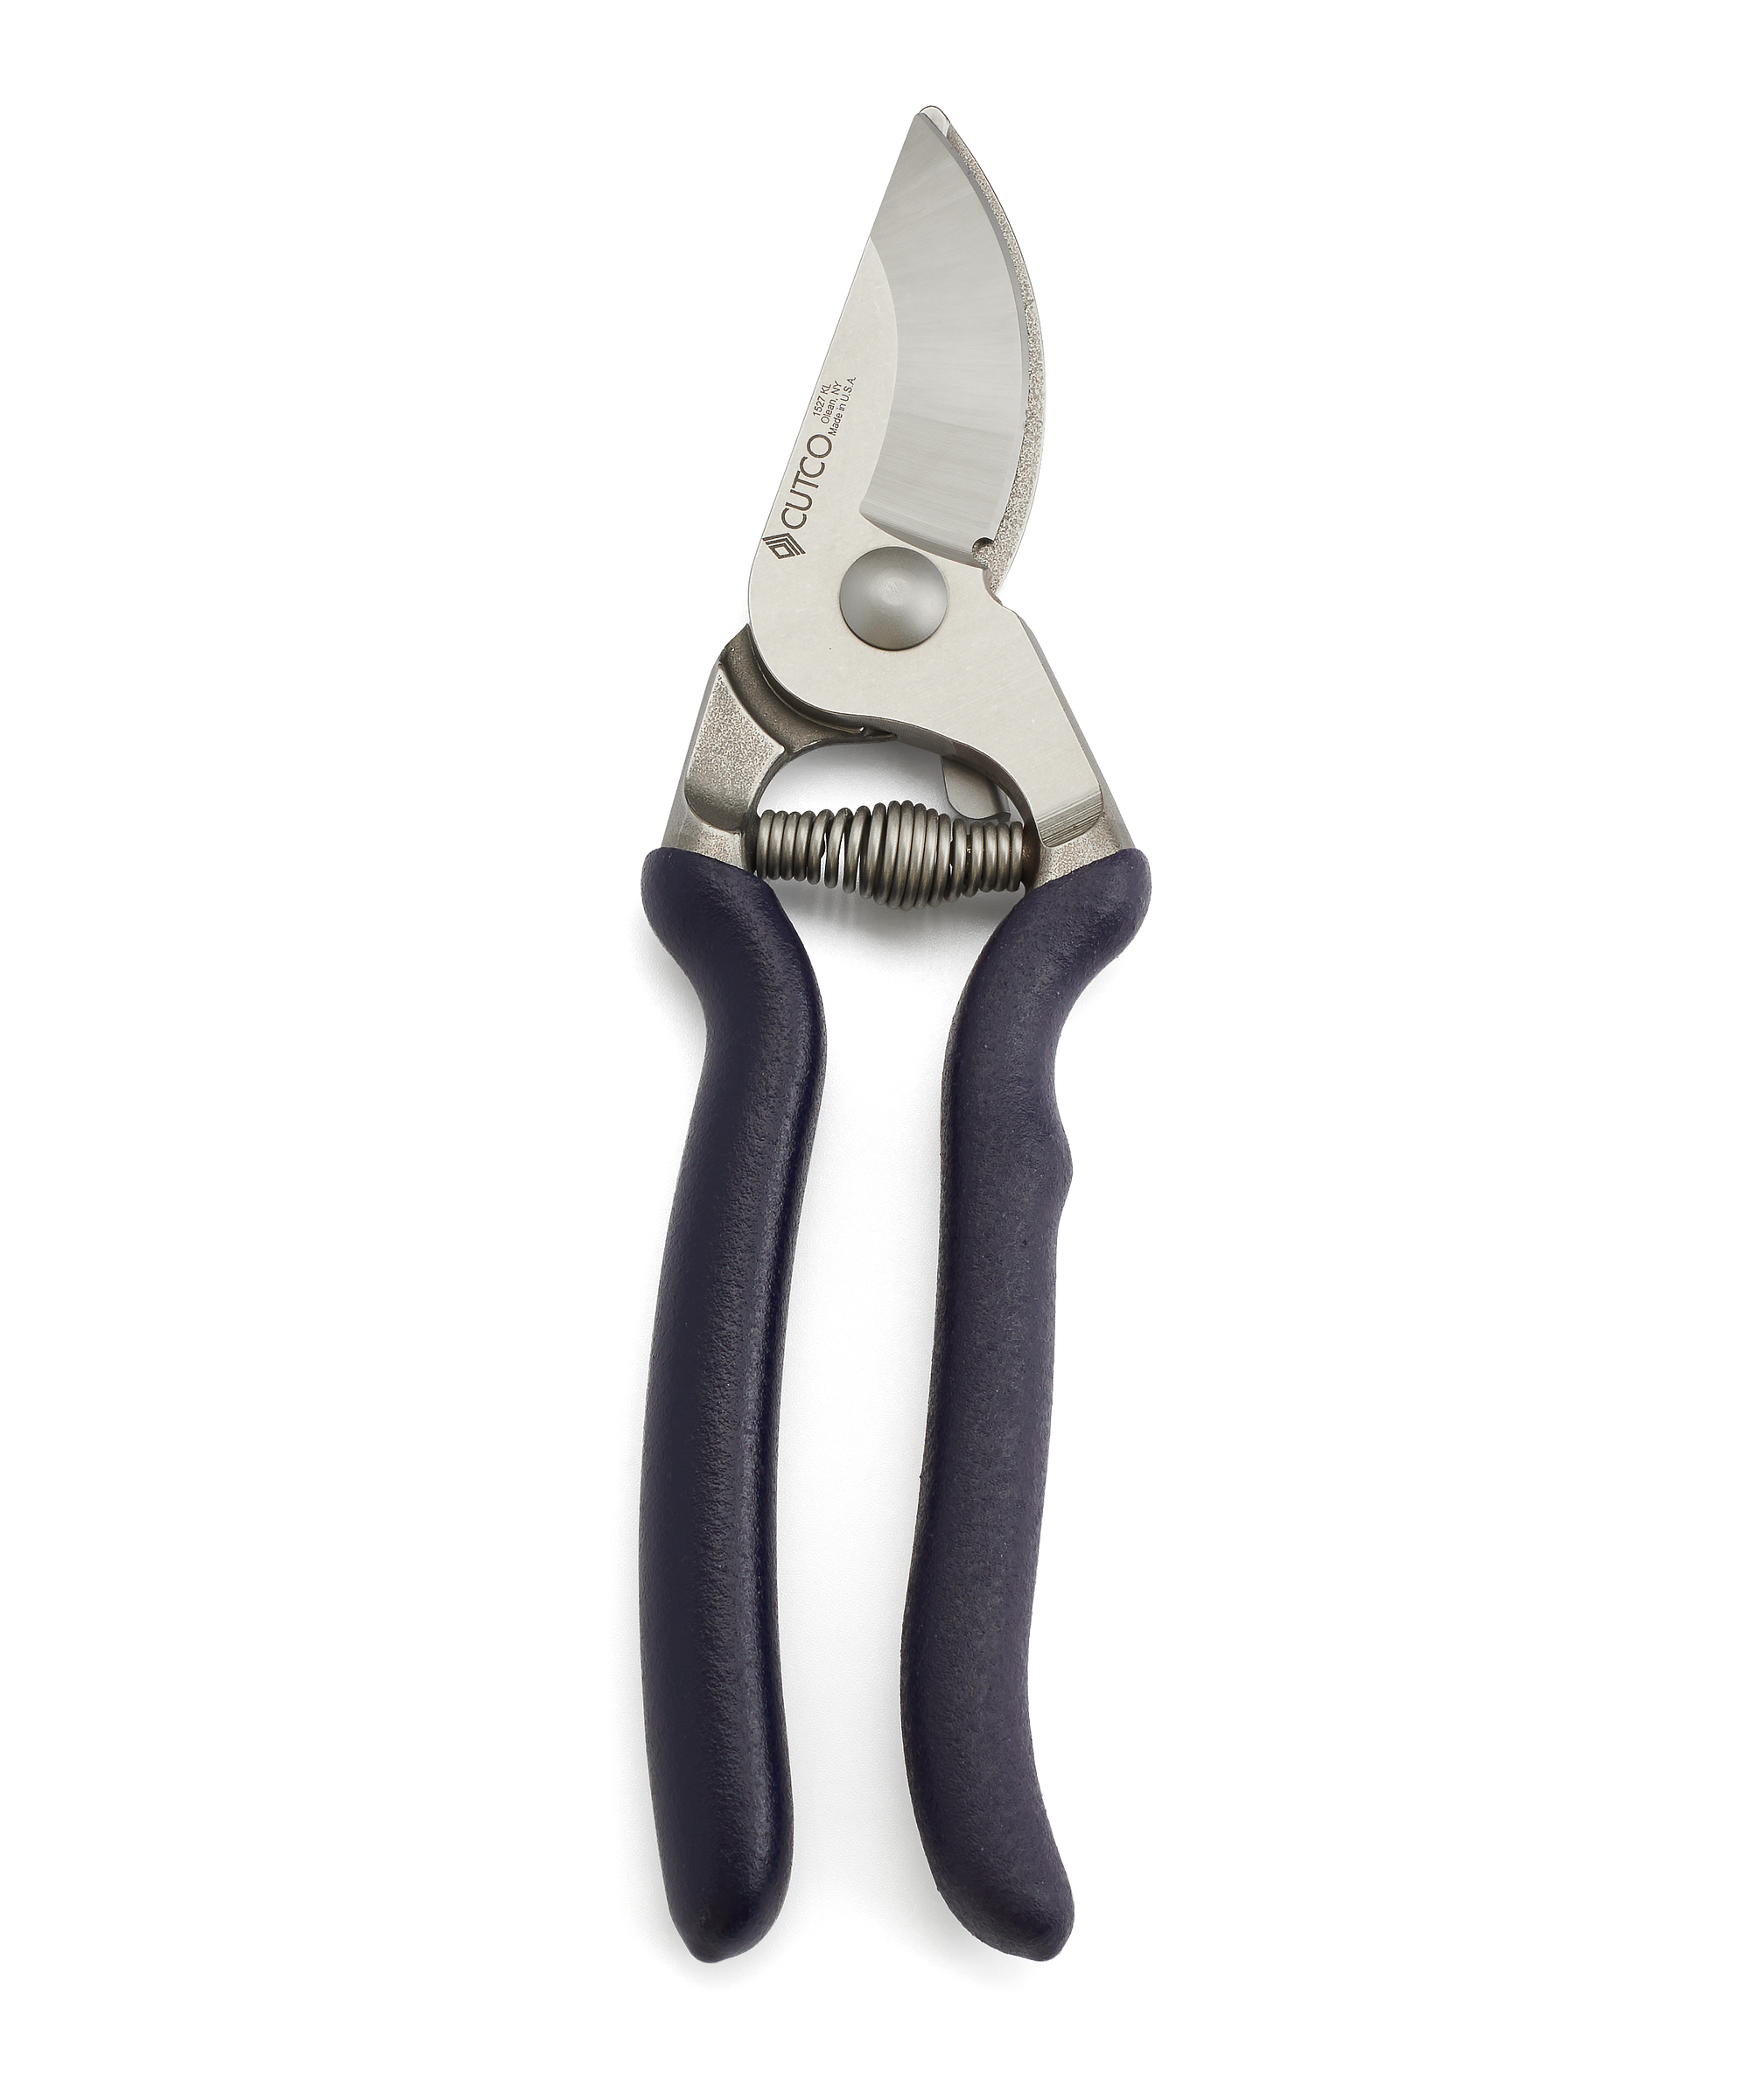 AlpineReach Professional Bypass Pruning Shears